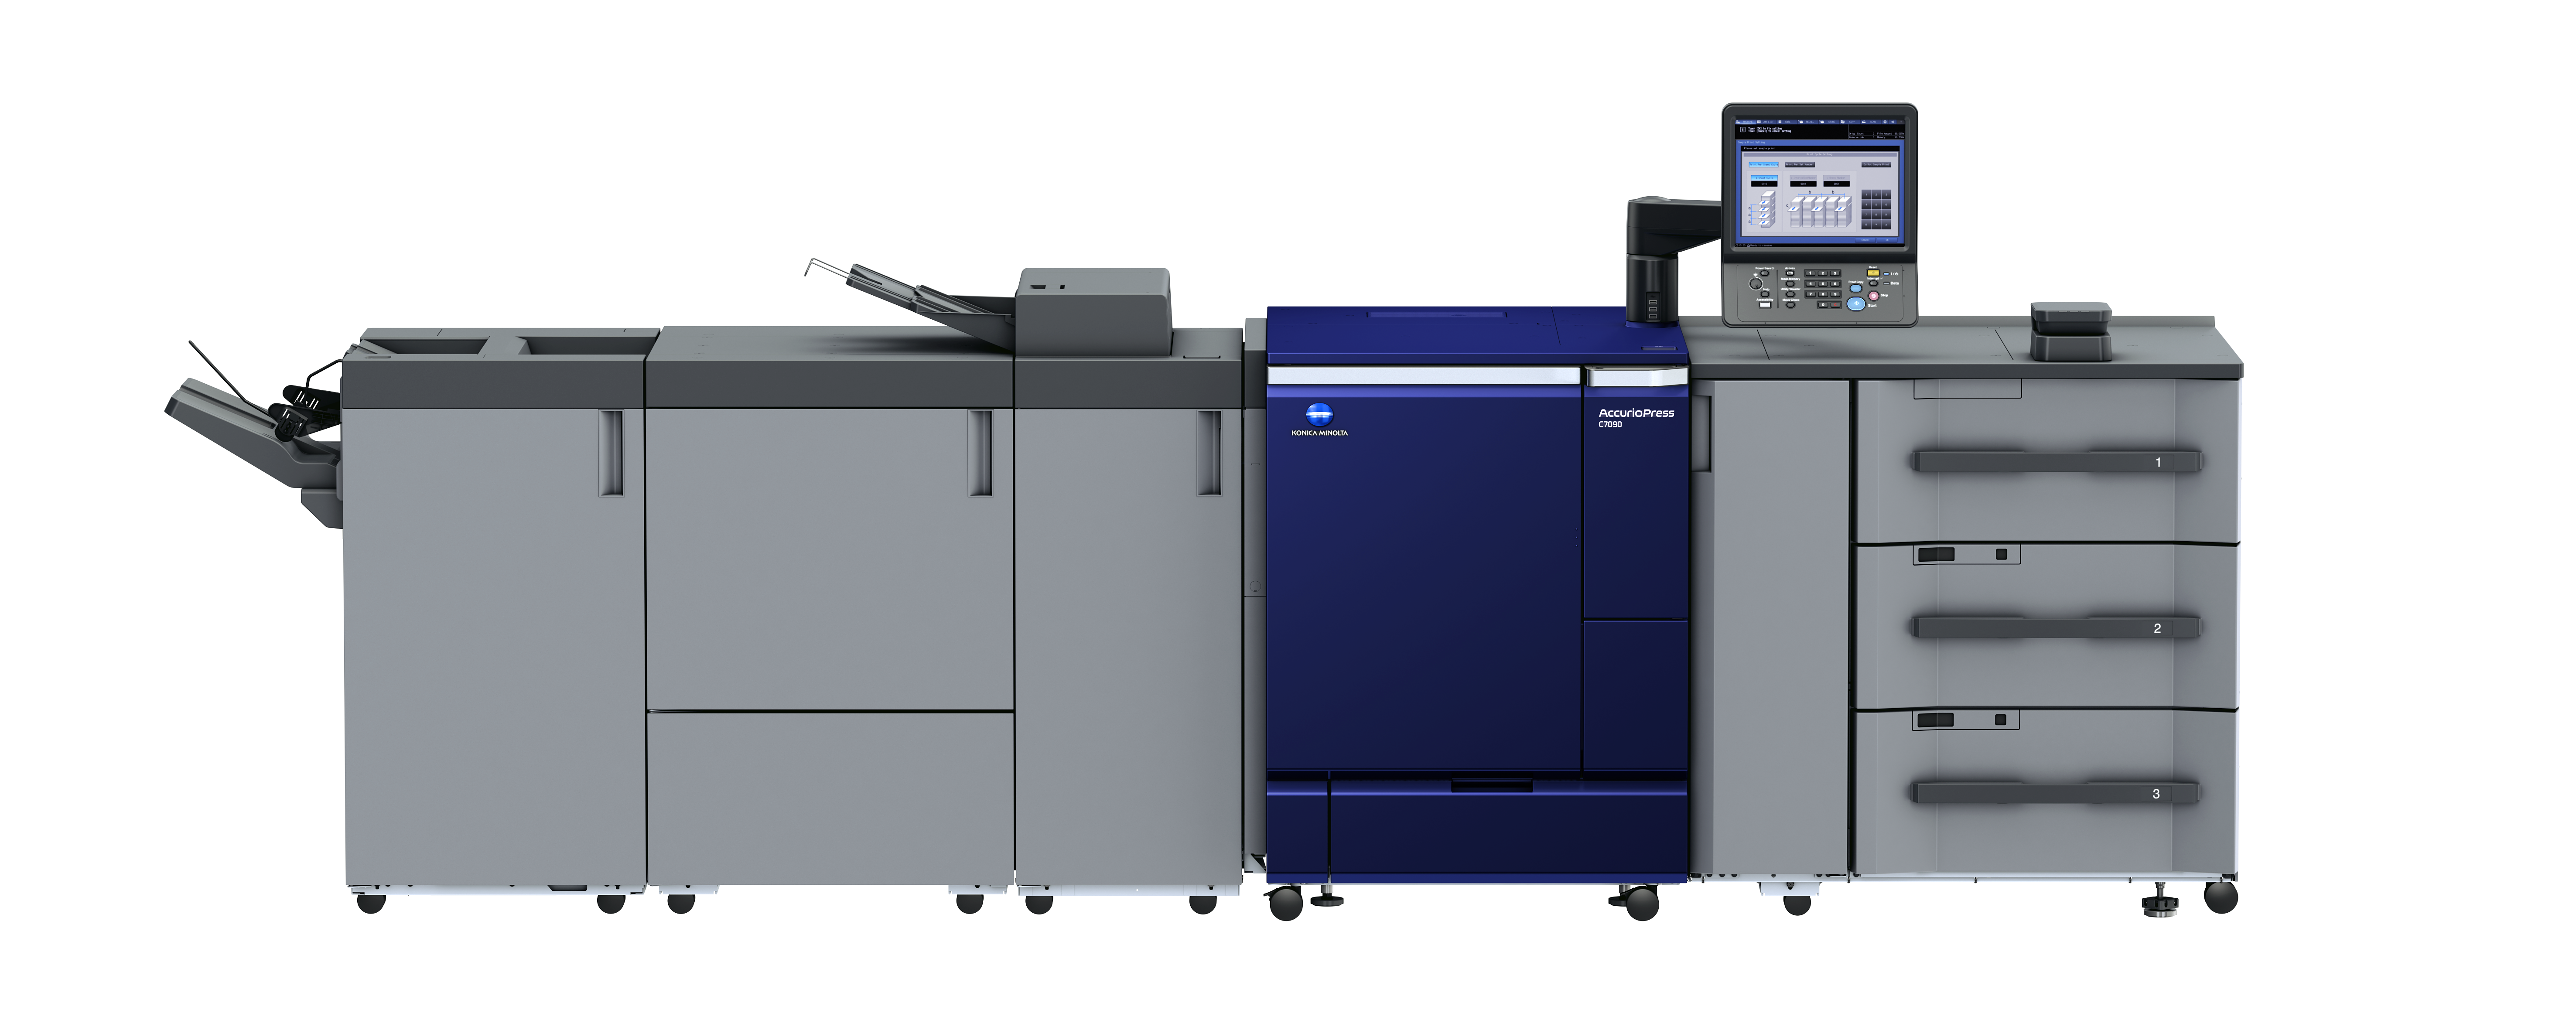 Print equipment sales in the Middle East and Africa projected to reach AED1.6 bn in 2026